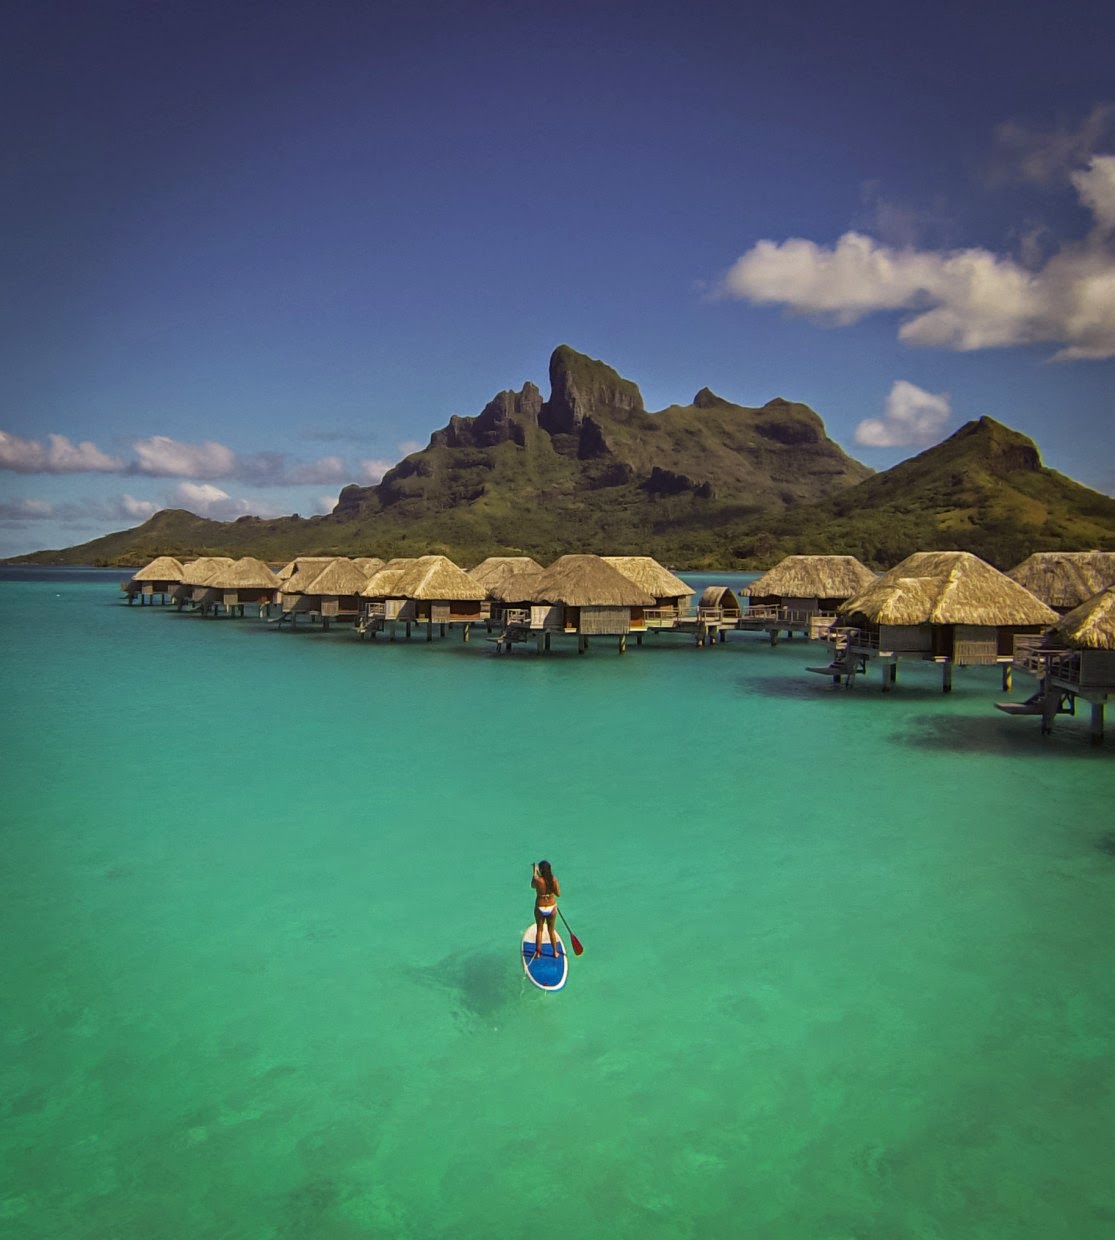 He Flew His Drone Over Bora Bora And Made The Coolest Video Ever.